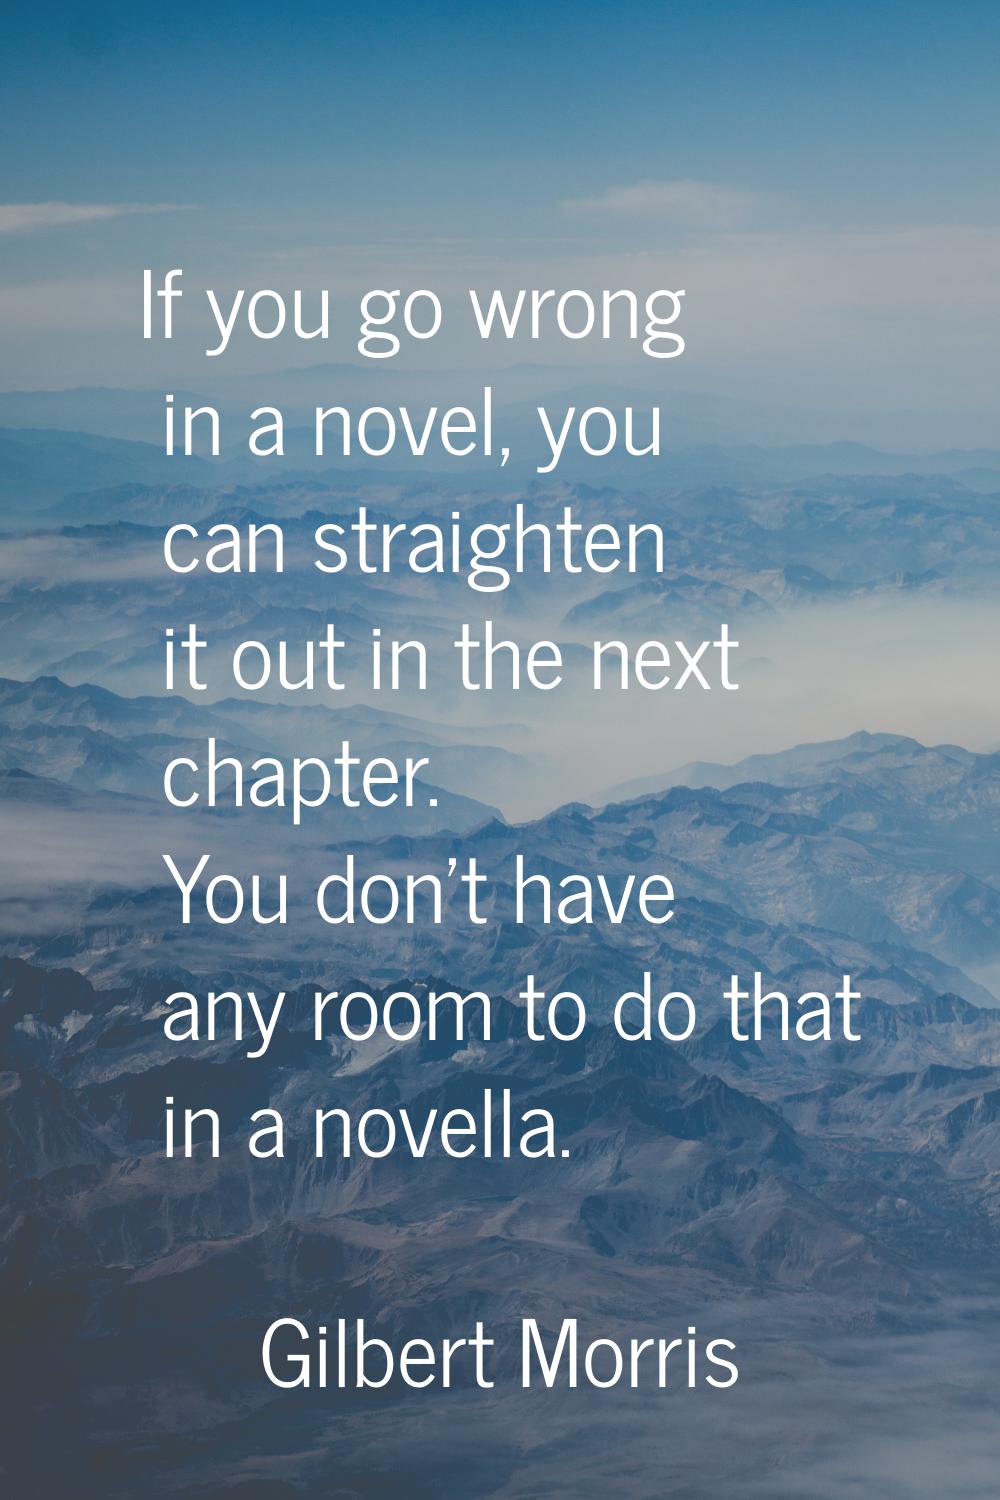 If you go wrong in a novel, you can straighten it out in the next chapter. You don't have any room 